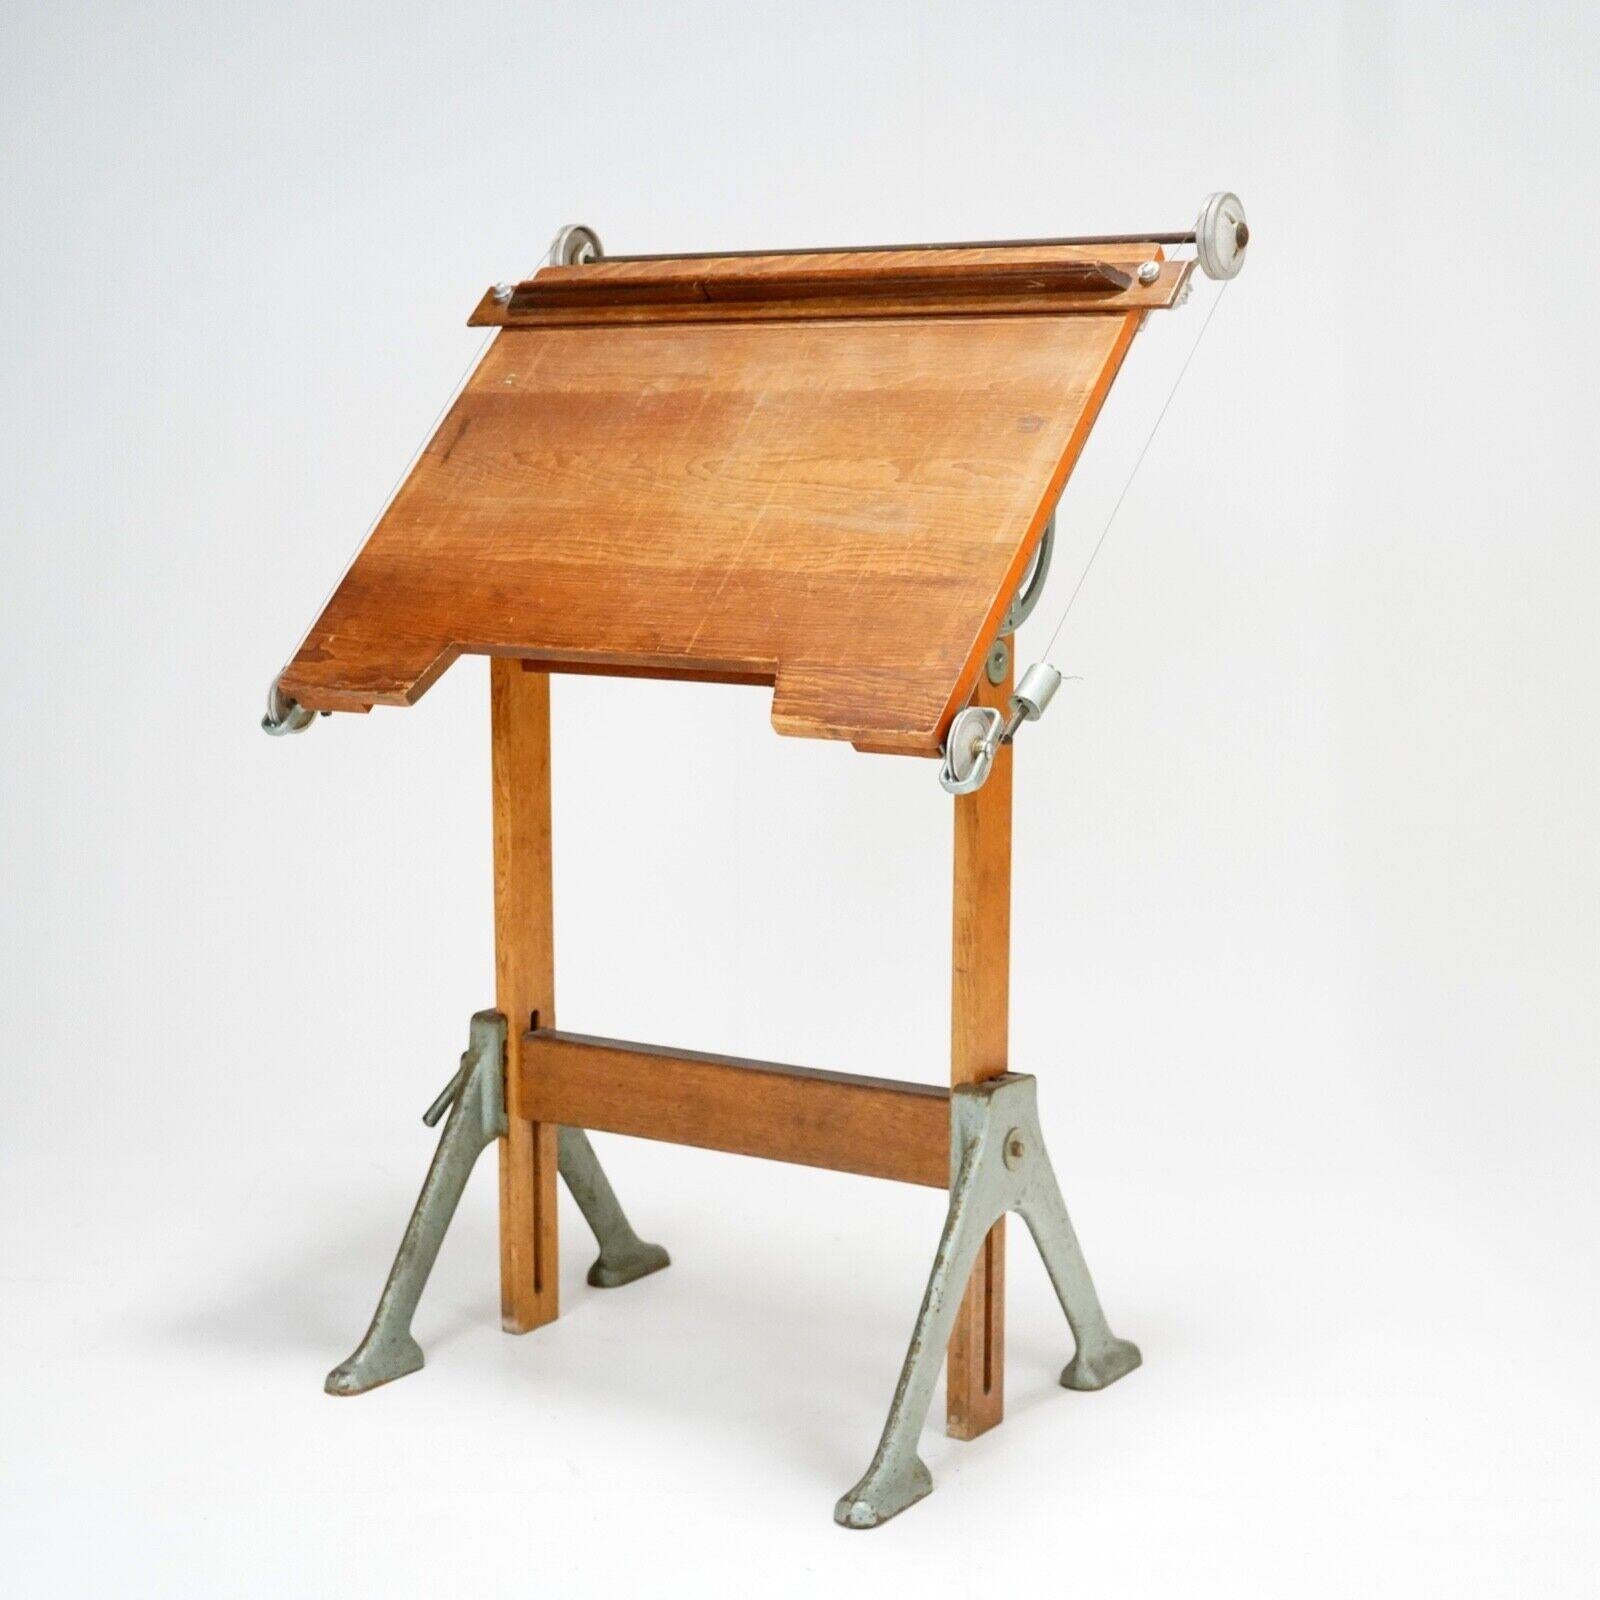 1940's Architect's Drafting Table - Midcentury Wooden & Iron Metal Base 5